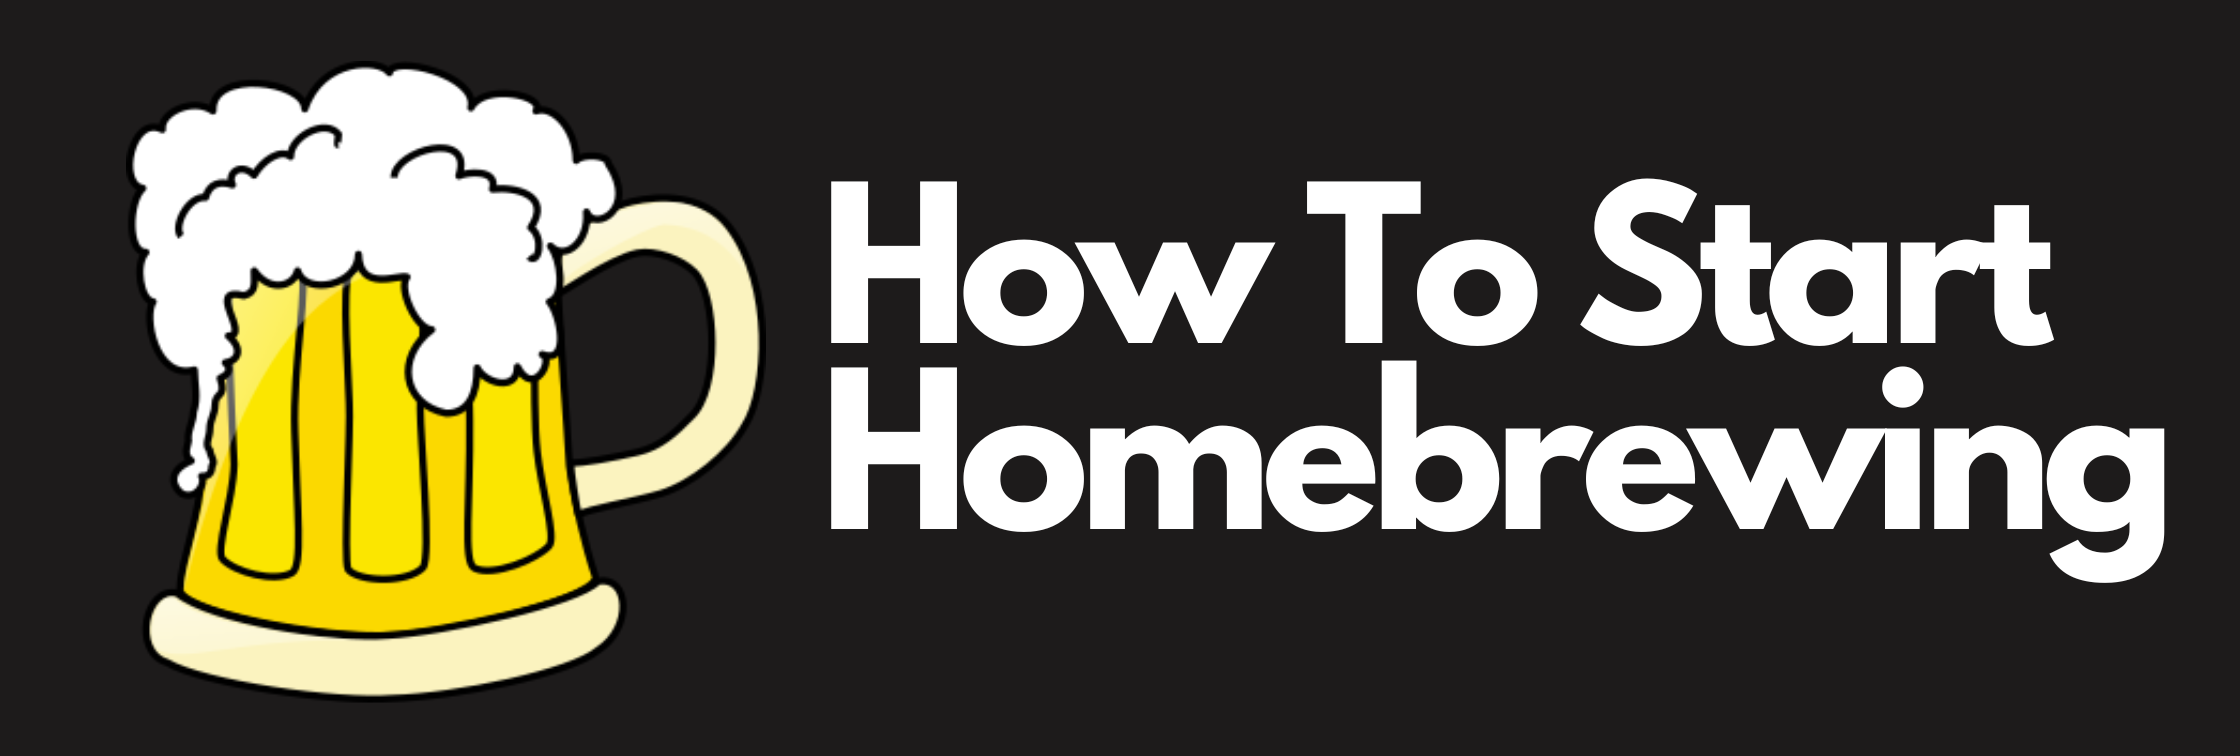 how to start homebrewing